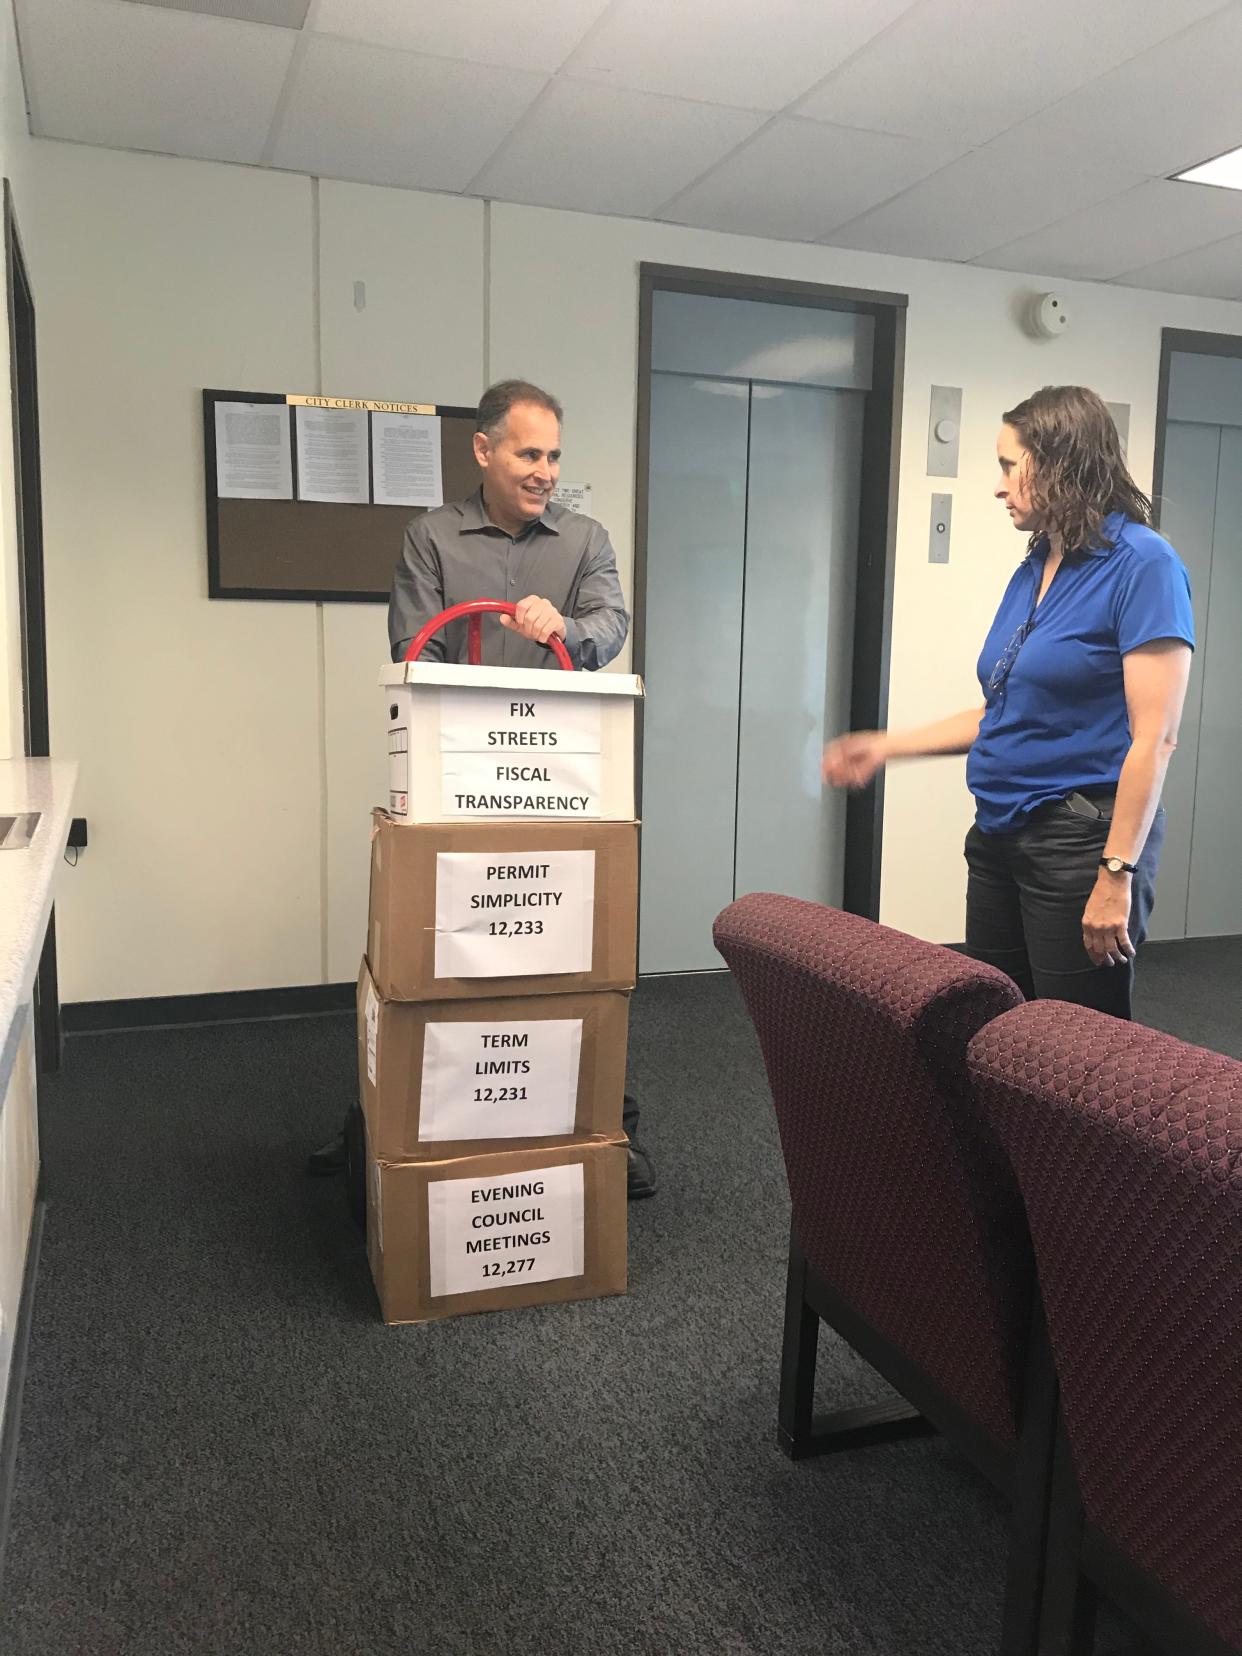 Aaron Starr, left, and Alicia Percell in 2019 submitted boxes of signed petitions for their ballot initiatives on Oxnard government. On Tuesday, the City Council placed a measure about term limits on the November ballot to comply with a court order.